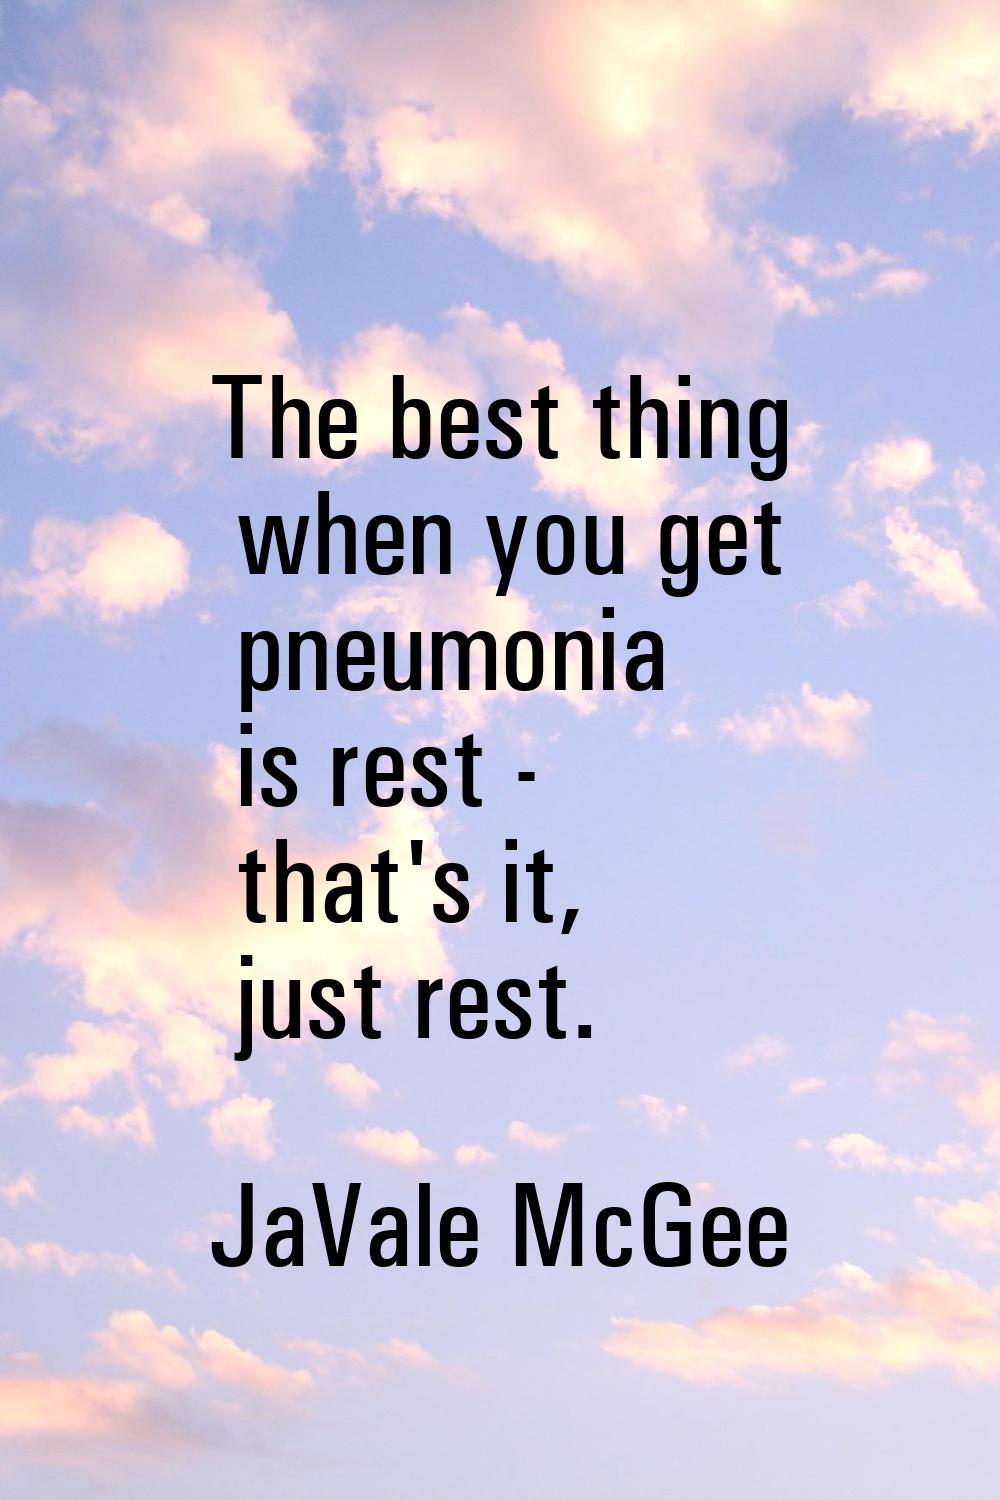 The best thing when you get pneumonia is rest - that's it, just rest.